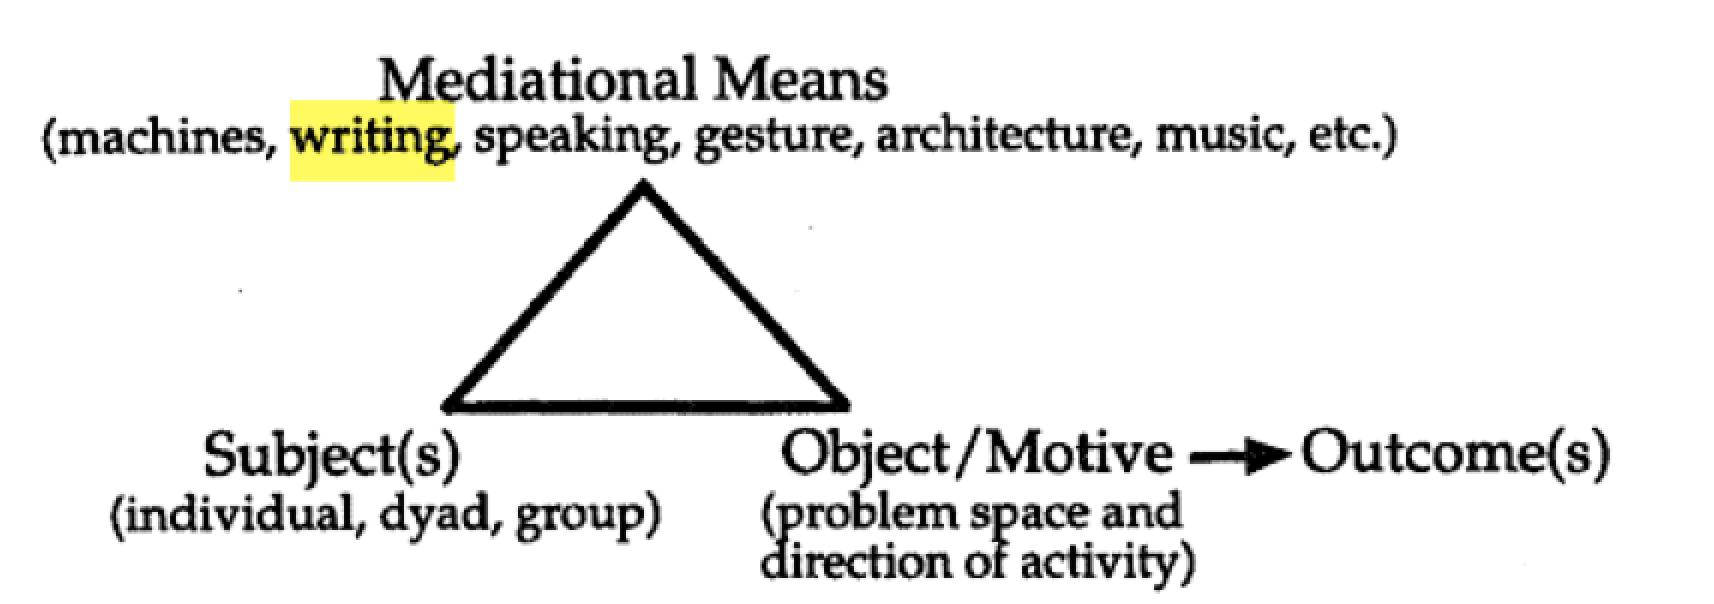 Simple activity system from Russell's Rethinking Genre in School and Society: An Activity Theory Analysis